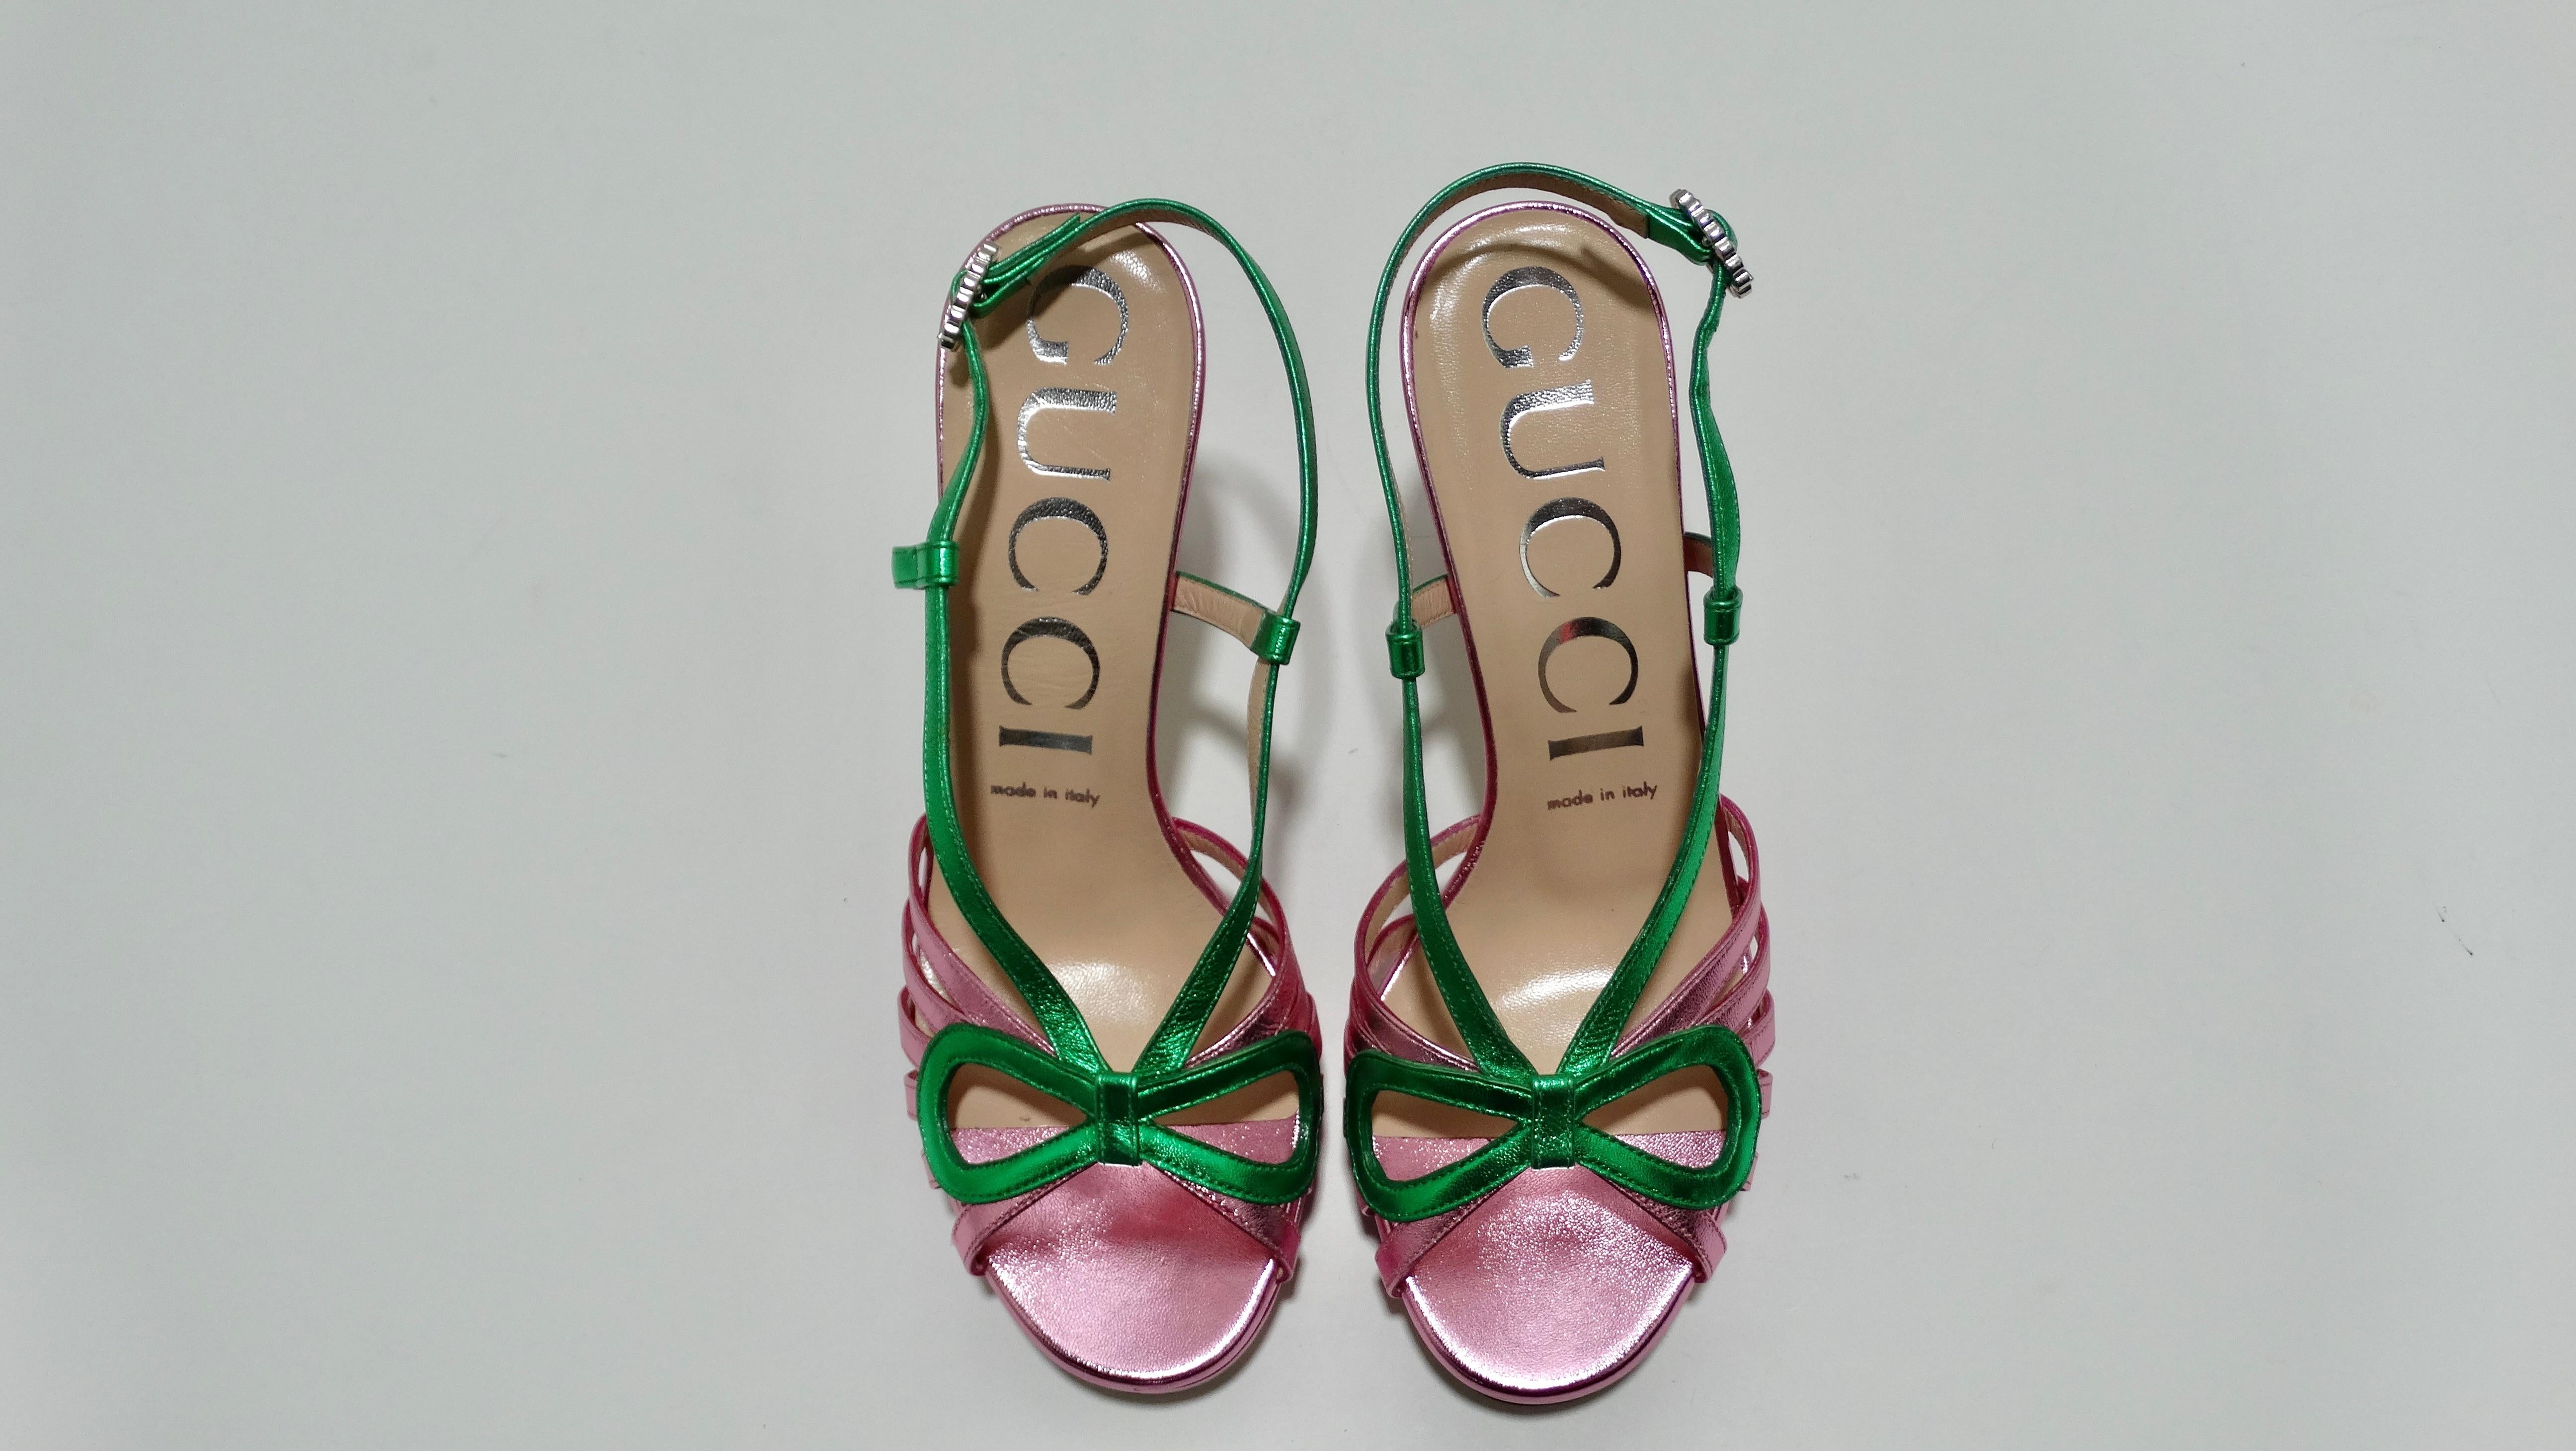 2018 Gucci Pink Green Metallic Leather Crossed Bow Sandals Platforms 2